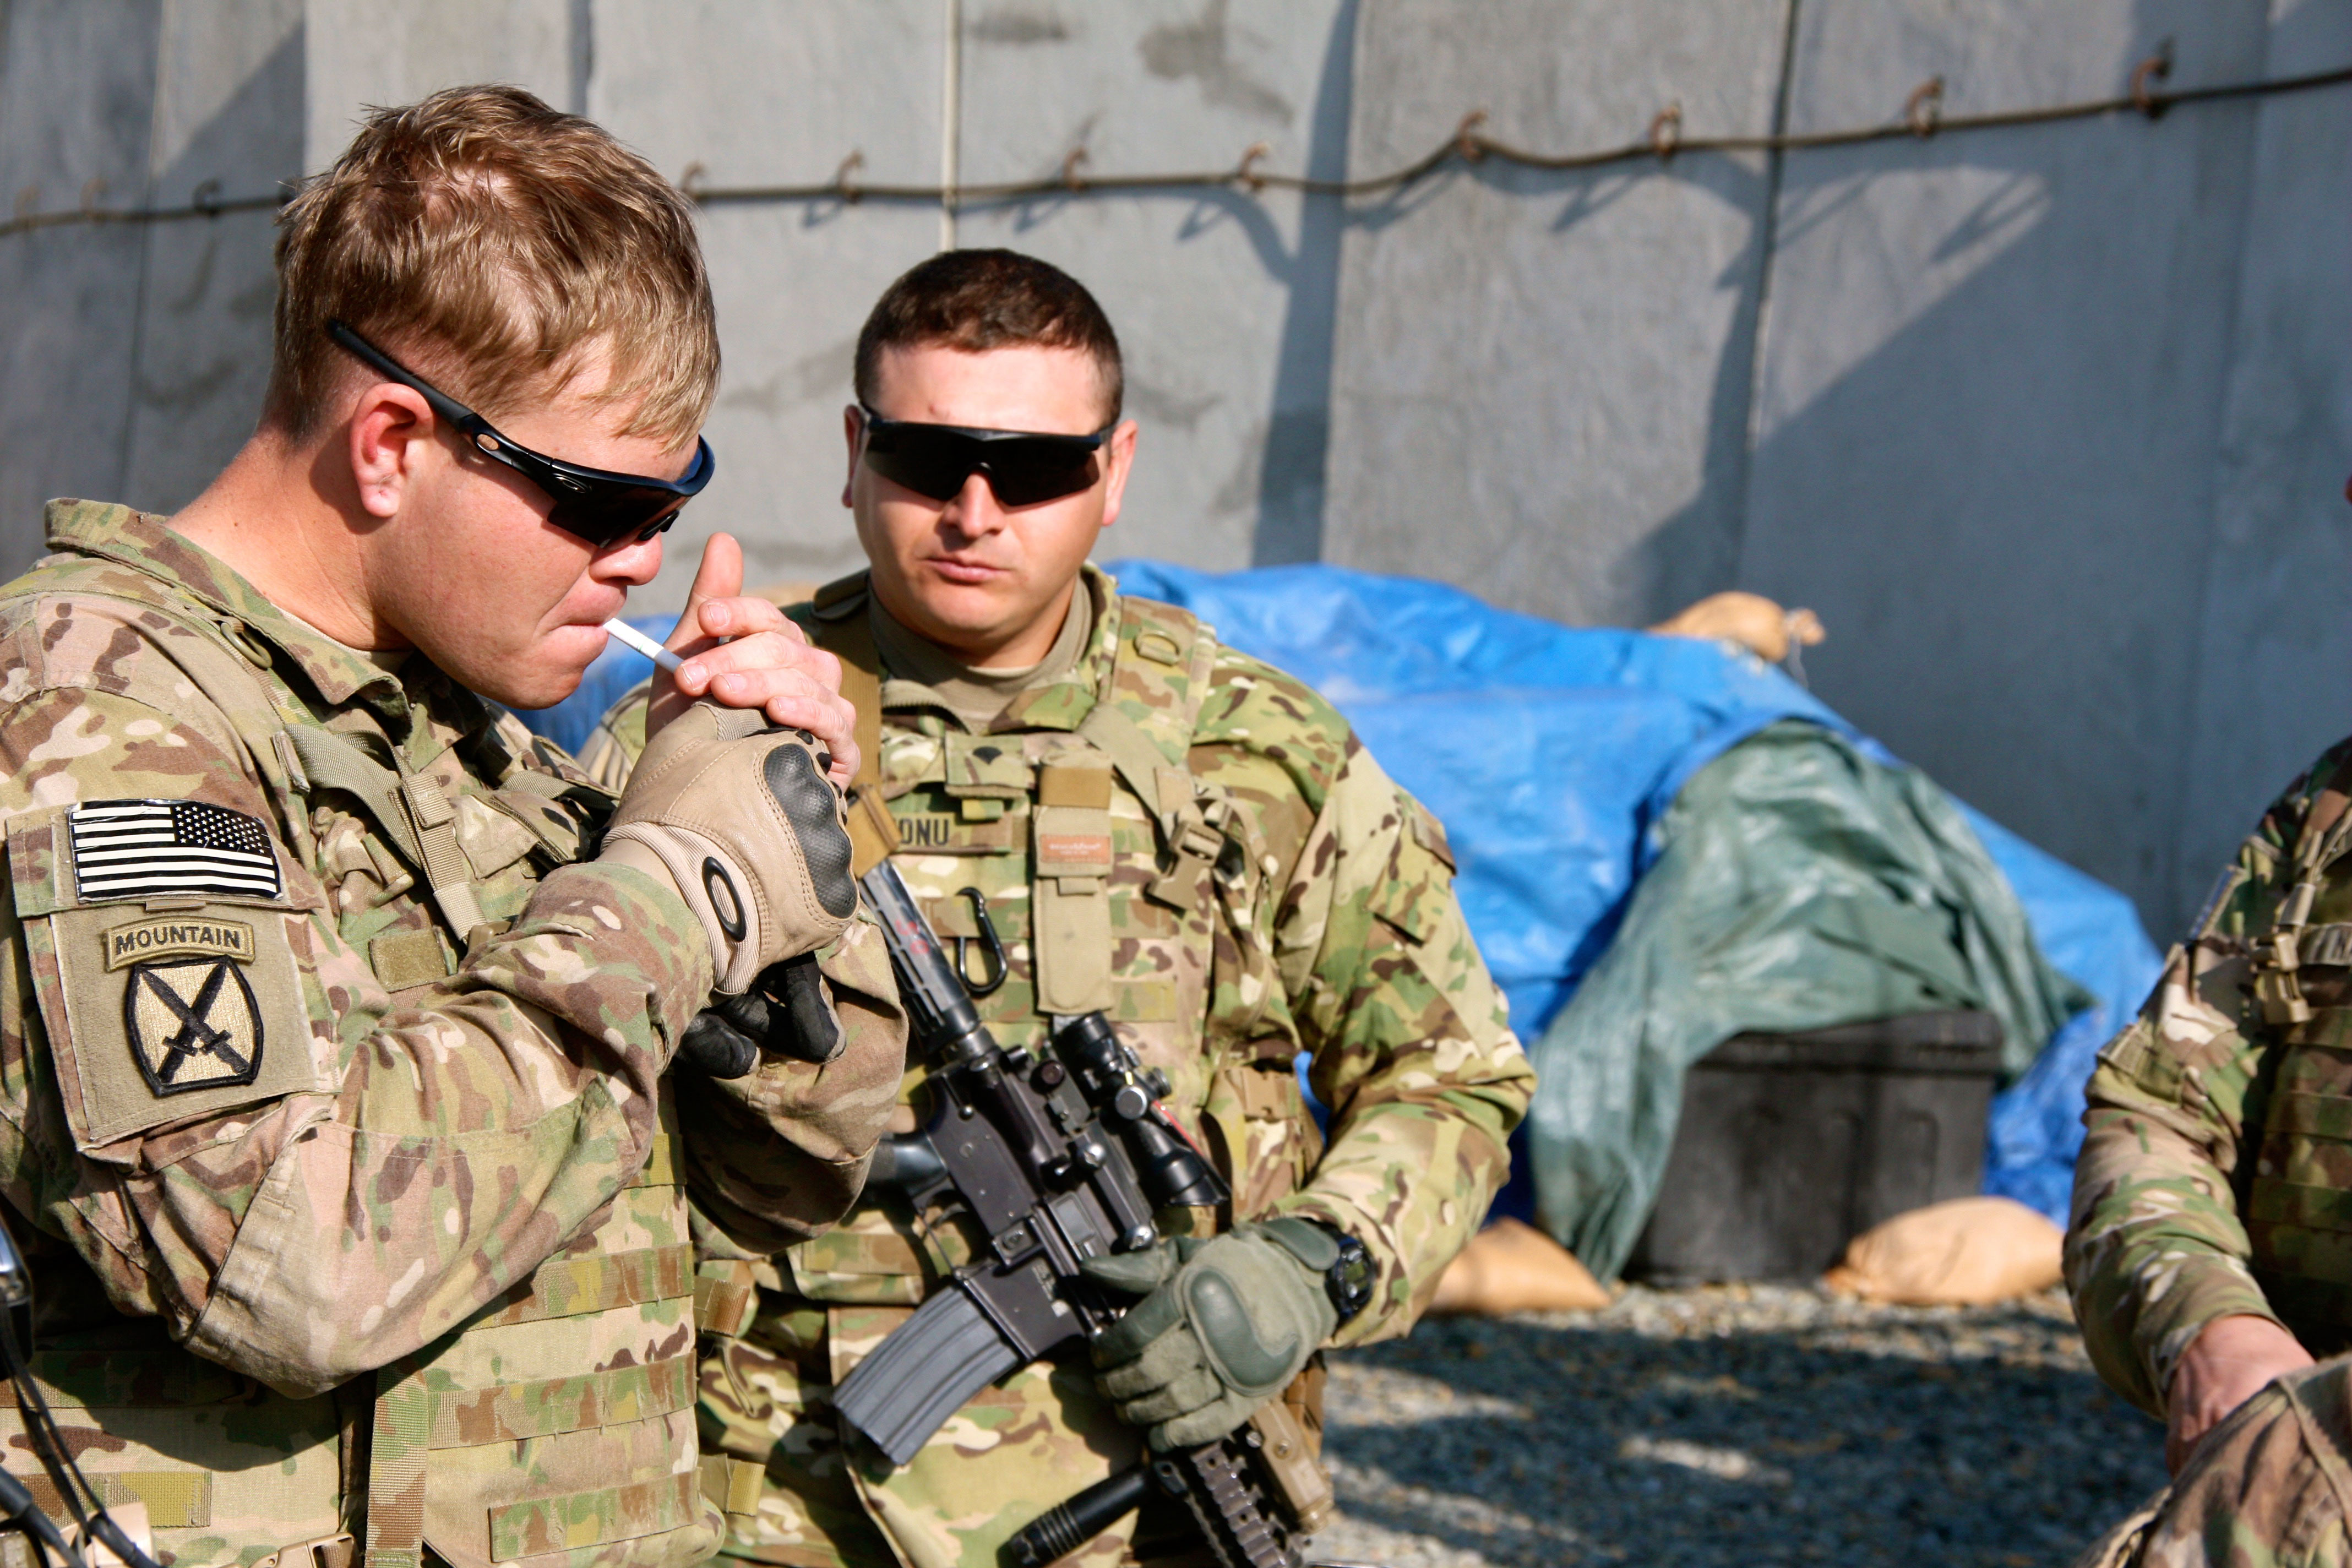 U.S. Army soldiers use a smaller, lighter variant of the M16, called the M4, in Afghanistan.